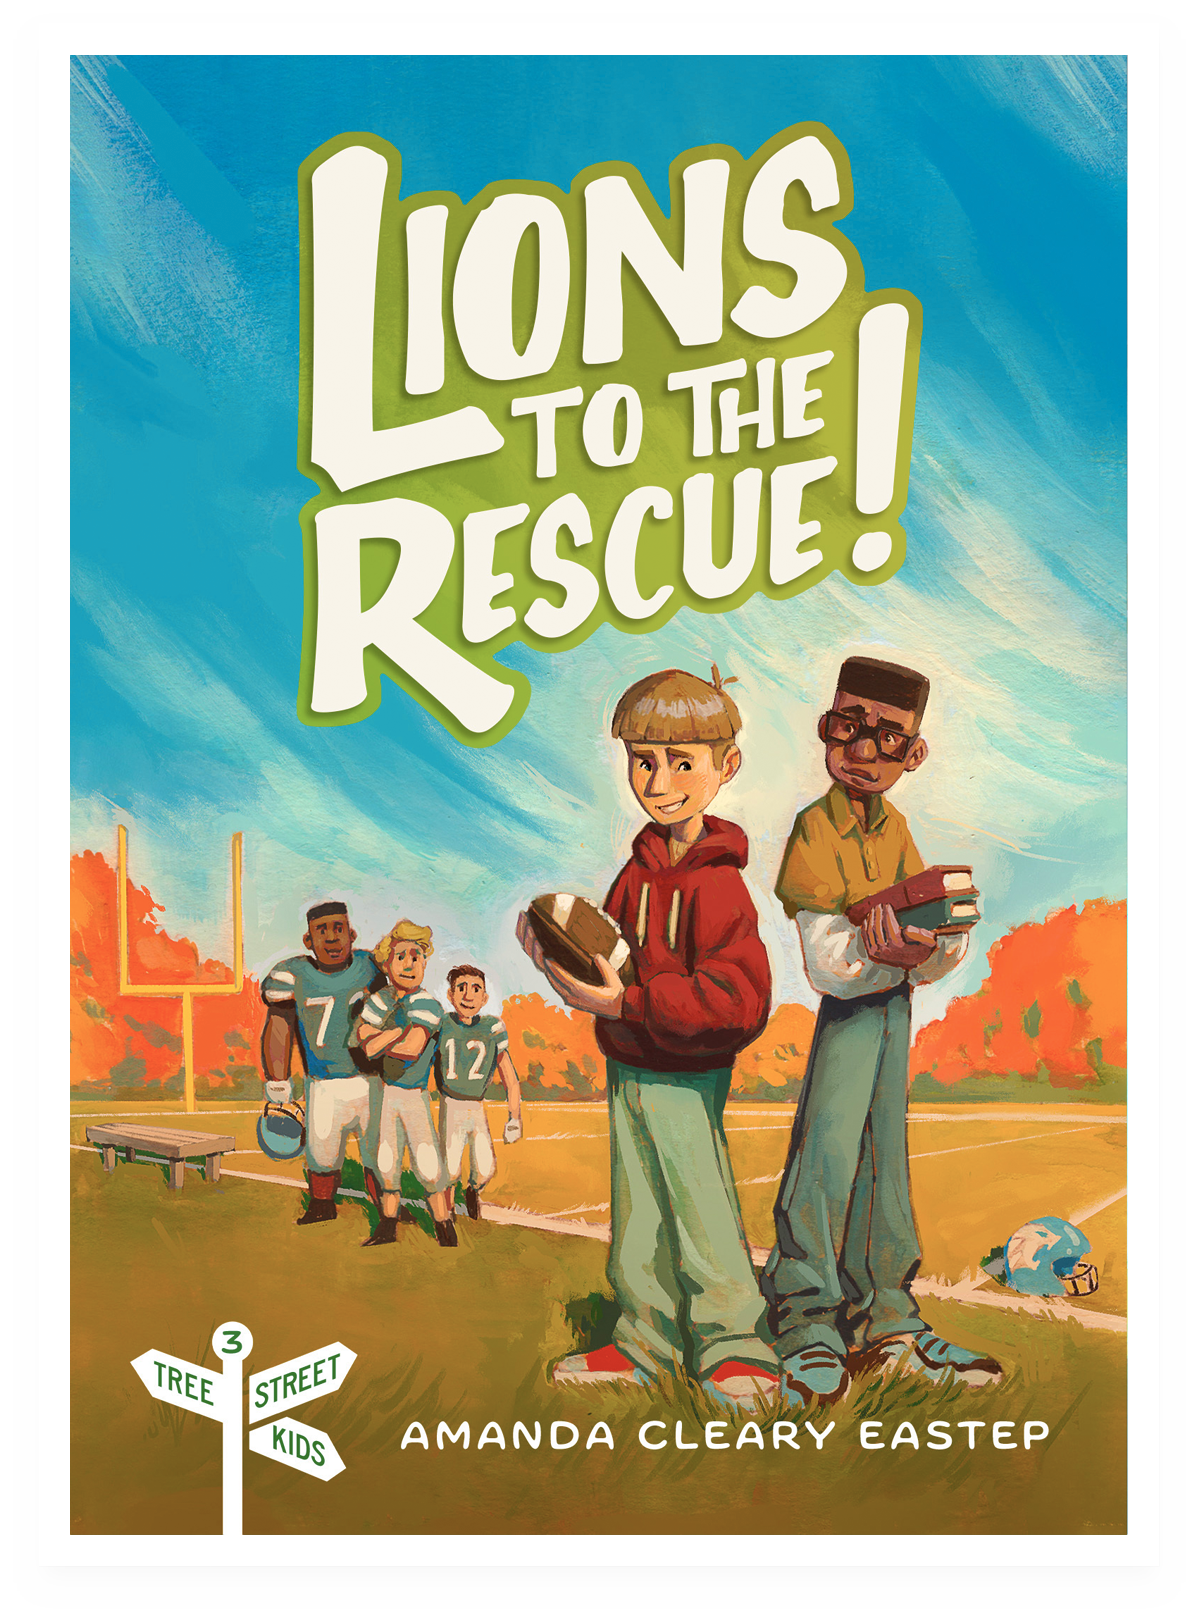 Lions to the rescue! book